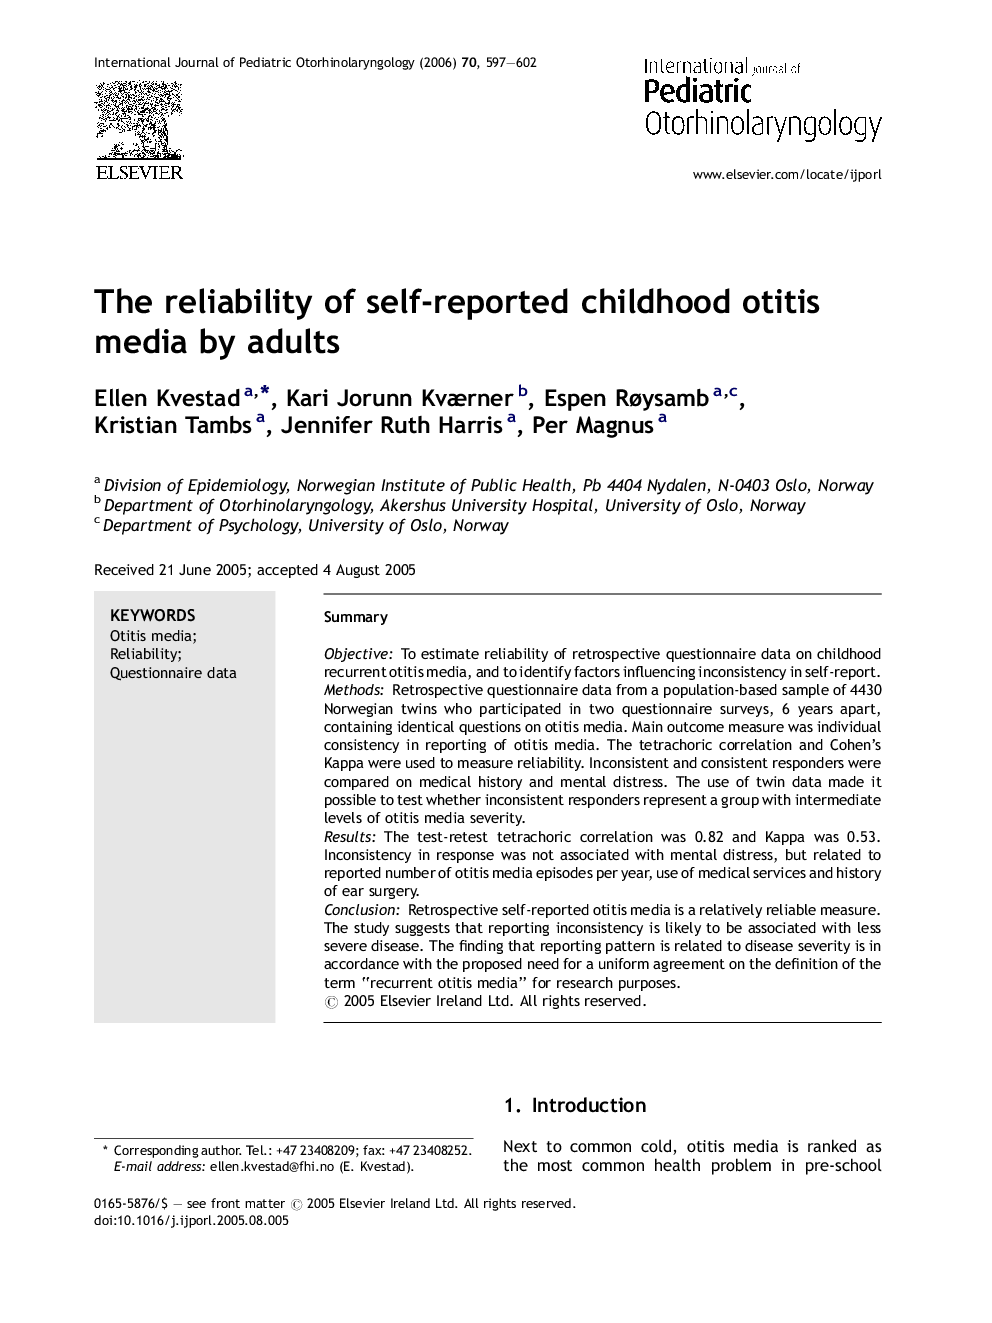 The reliability of self-reported childhood otitis media by adults